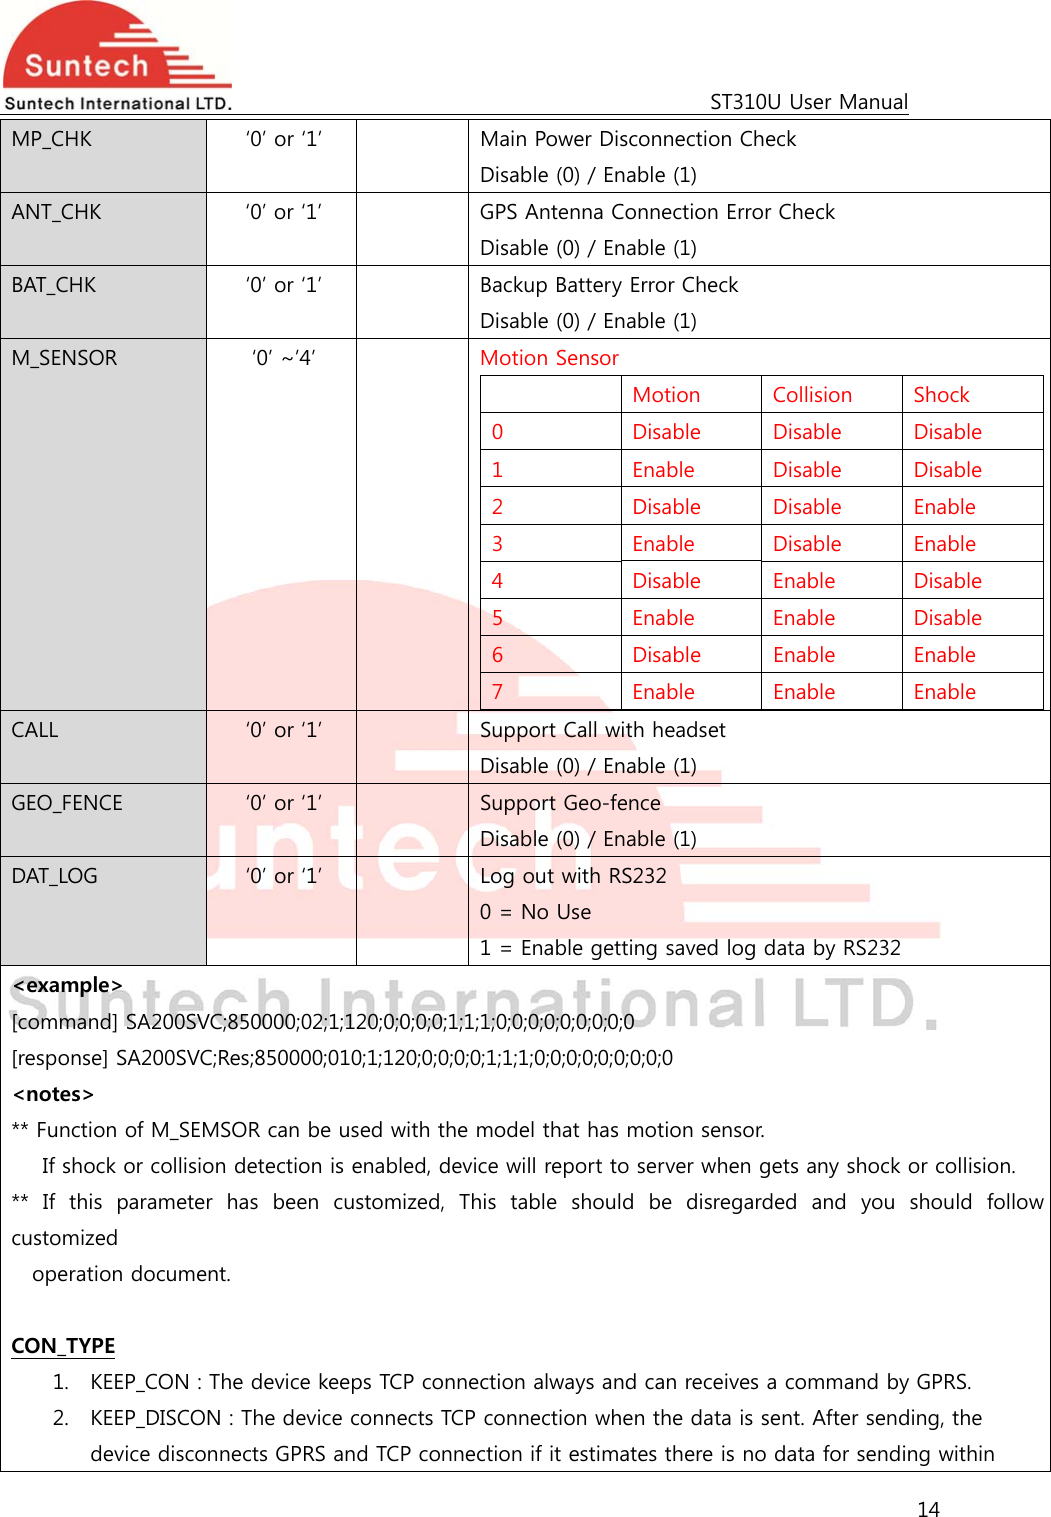                                                                                             ST310U User Manual 14  MP_CHK  ‘0’ or ‘1’    Main Power Disconnection Check Disable (0) / Enable (1) ANT_CHK  ‘0’ or ‘1’    GPS Antenna Connection Error Check Disable (0) / Enable (1) BAT_CHK  ‘0’ or ‘1’    Backup Battery Error Check Disable (0) / Enable (1) M_SENSOR  ‘0’ ~’4’    Motion Sensor   Motion  Collision  Shock 0  Disable  Disable  Disable 1  Enable  Disable  Disable 2  Disable  Disable  Enable 3  Enable  Disable  Enable 4  Disable  Enable  Disable 5  Enable  Enable  Disable 6  Disable  Enable  Enable 7  Enable  Enable  Enable CALL  ‘0’ or ‘1’    Support Call with headset Disable (0) / Enable (1) GEO_FENCE  ‘0’ or ‘1’    Support Geo-fence Disable (0) / Enable (1) DAT_LOG  ‘0’ or ‘1’    Log out with RS232 0 = No Use 1 = Enable getting saved log data by RS232 &lt;example&gt; [command] SA200SVC;850000;02;1;120;0;0;0;0;1;1;1;0;0;0;0;0;0;0;0;0 [response] SA200SVC;Res;850000;010;1;120;0;0;0;0;1;1;1;0;0;0;0;0;0;0;0;0 &lt;notes&gt; ** Function of M_SEMSOR can be used with the model that has motion sensor.       If shock or collision detection is enabled, device will report to server when gets any shock or collision. **  If  this  parameter  has  been  customized,  This  table  should  be  disregarded  and  you  should  follow customized  operation document.  CON_TYPE 1. KEEP_CON : The device keeps TCP connection always and can receives a command by GPRS. 2. KEEP_DISCON : The device connects TCP connection when the data is sent. After sending, the device disconnects GPRS and TCP connection if it estimates there is no data for sending within 